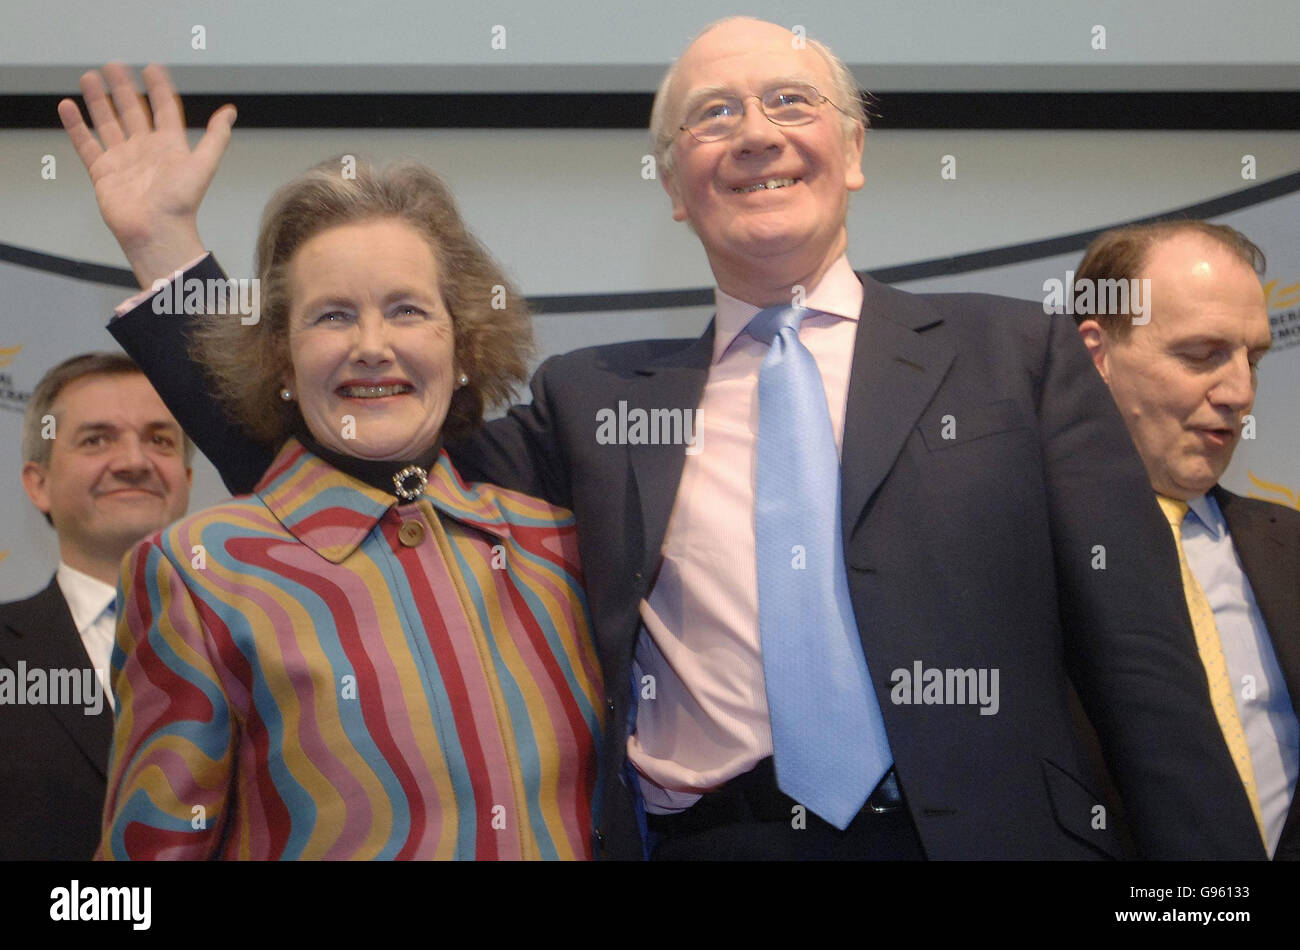 Sir Menzies Campbell celebrates with his wife Elspeth after he was elected the new leader of the Liberal Democrats, Thursday March 2, 2006. He secured 29,697 of the votes from party members, defeating his nearest rival Chris Huhne, who won 21,628. Simon Hughes, the Lib Dem president, came third, having been knocked out under the party's transferable vote ballot system in a first round of voting. See PA story POLITICS LibDems. PRESS ASSOCIATION Photo. Photo credit should read: Stefan Rousseau/PA. Stock Photo